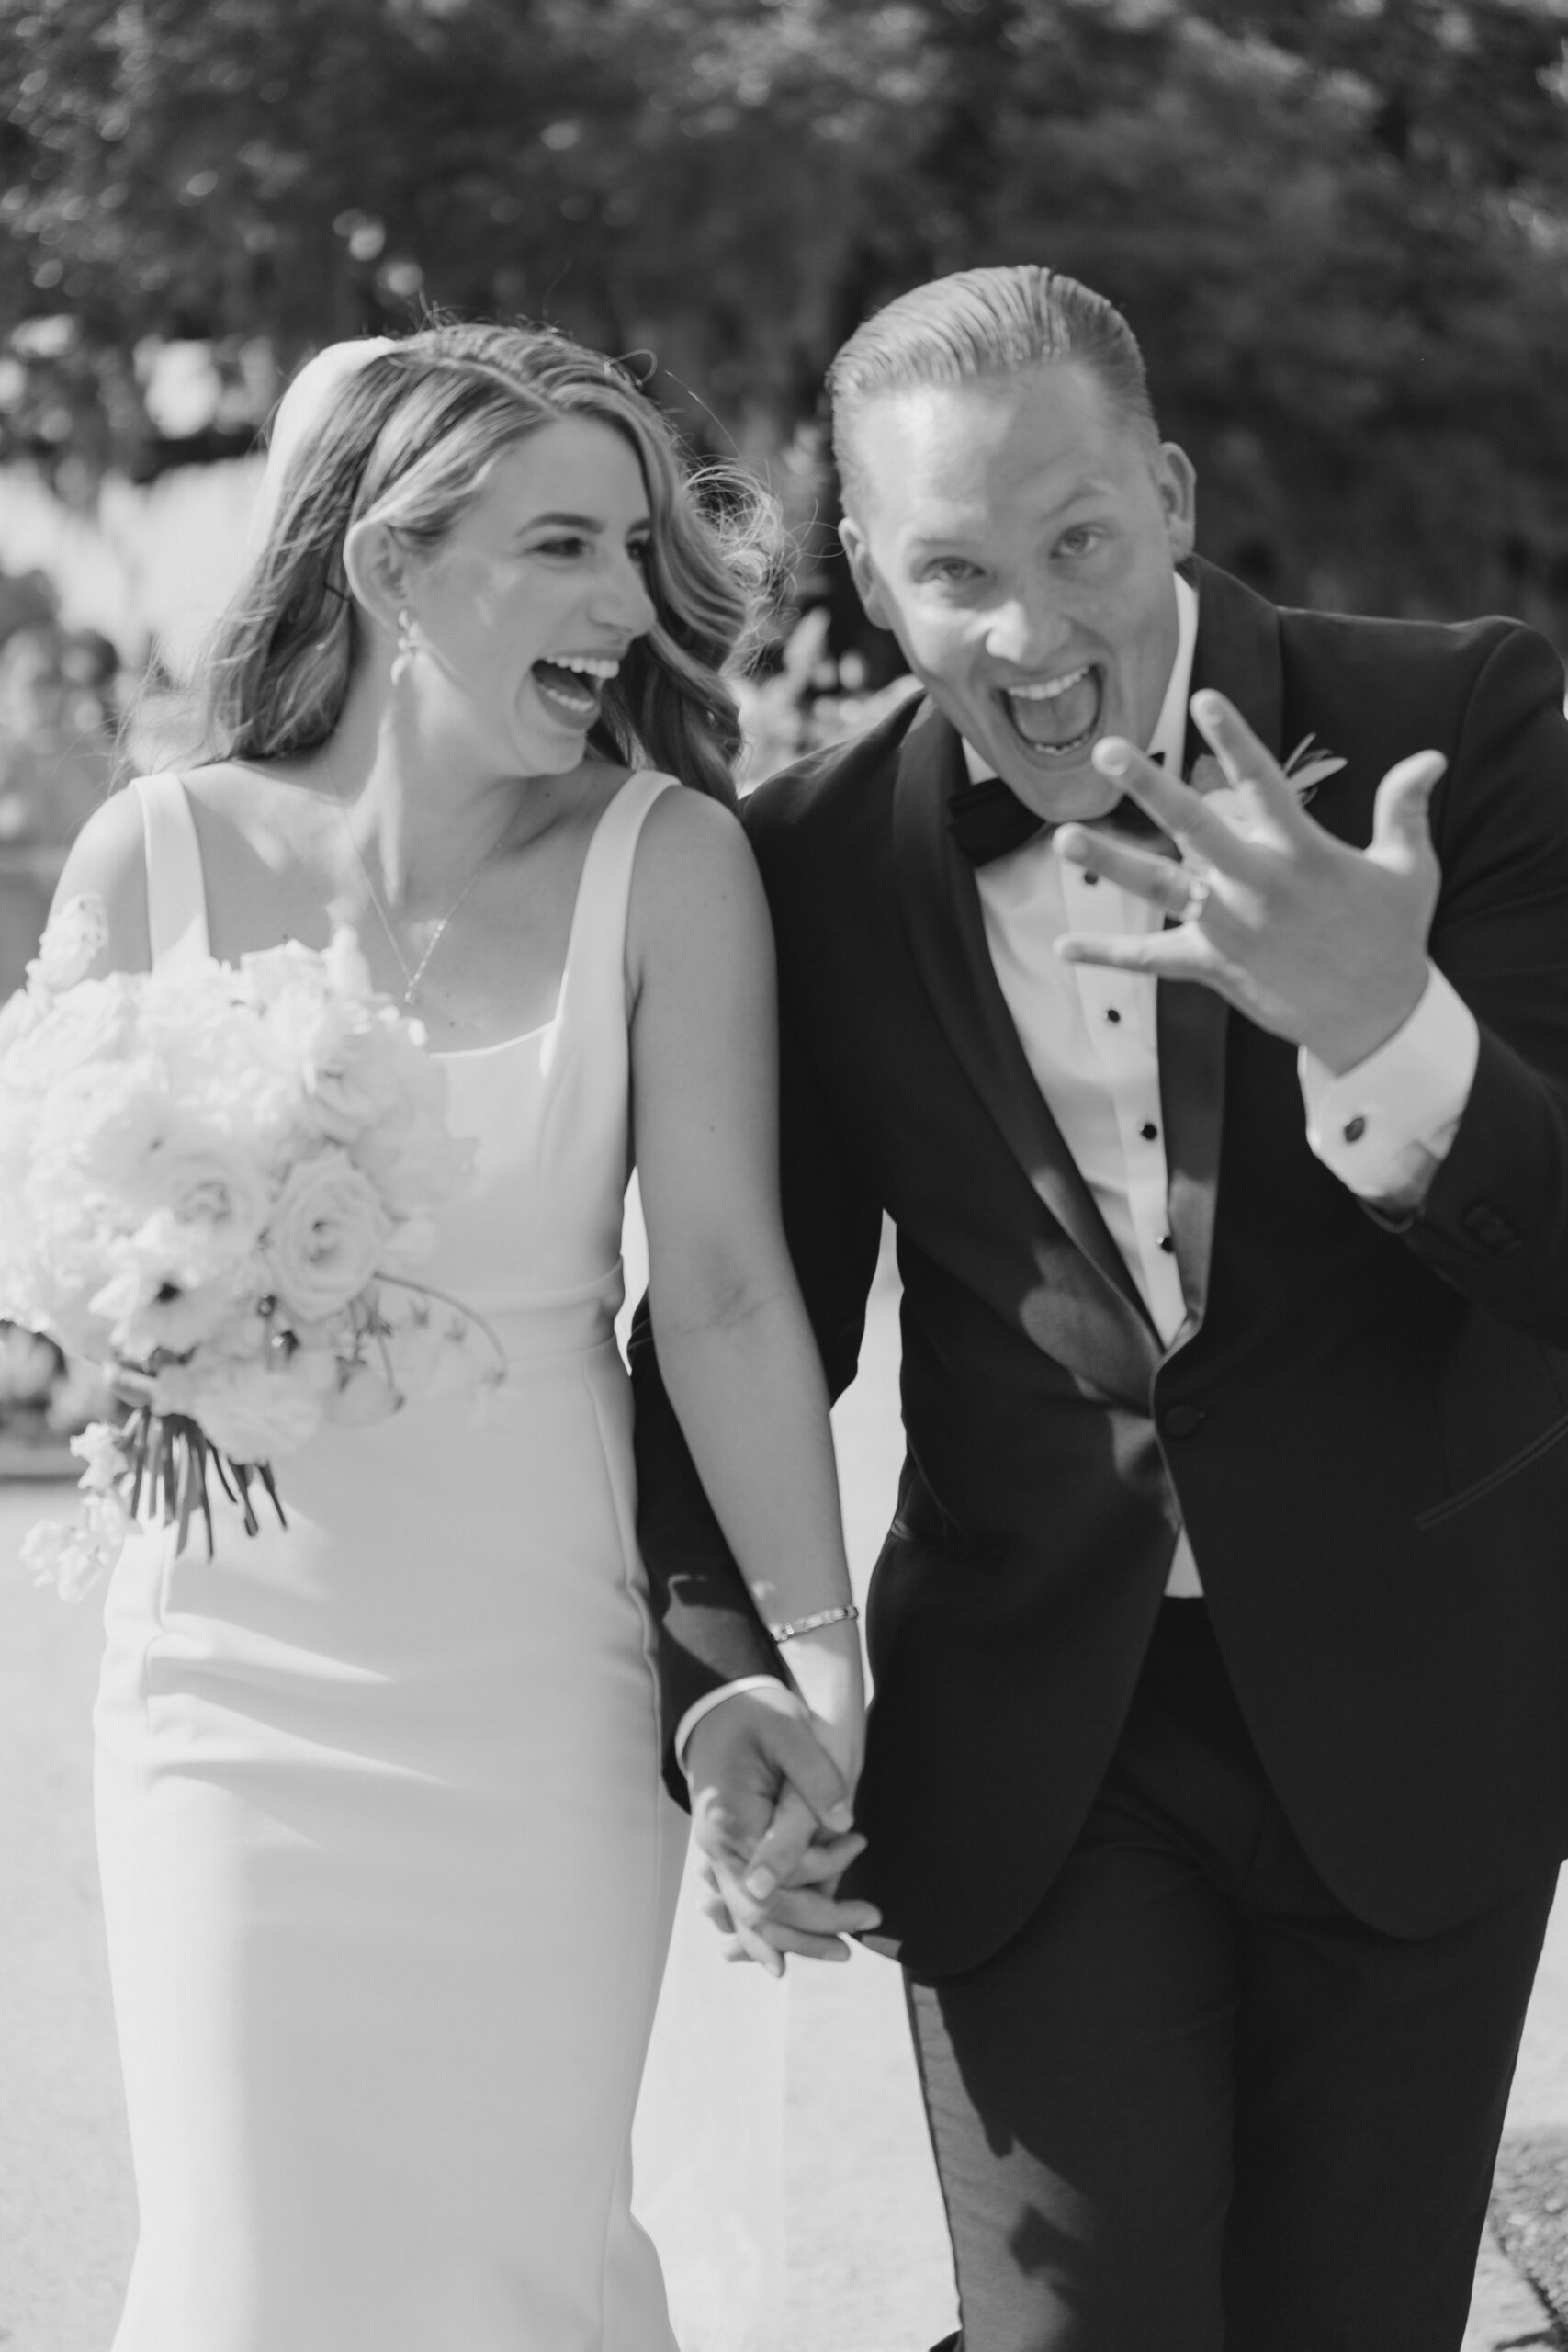 Black and white wedding photo. Groom shows off new ring after outdoor wedding ceremony.